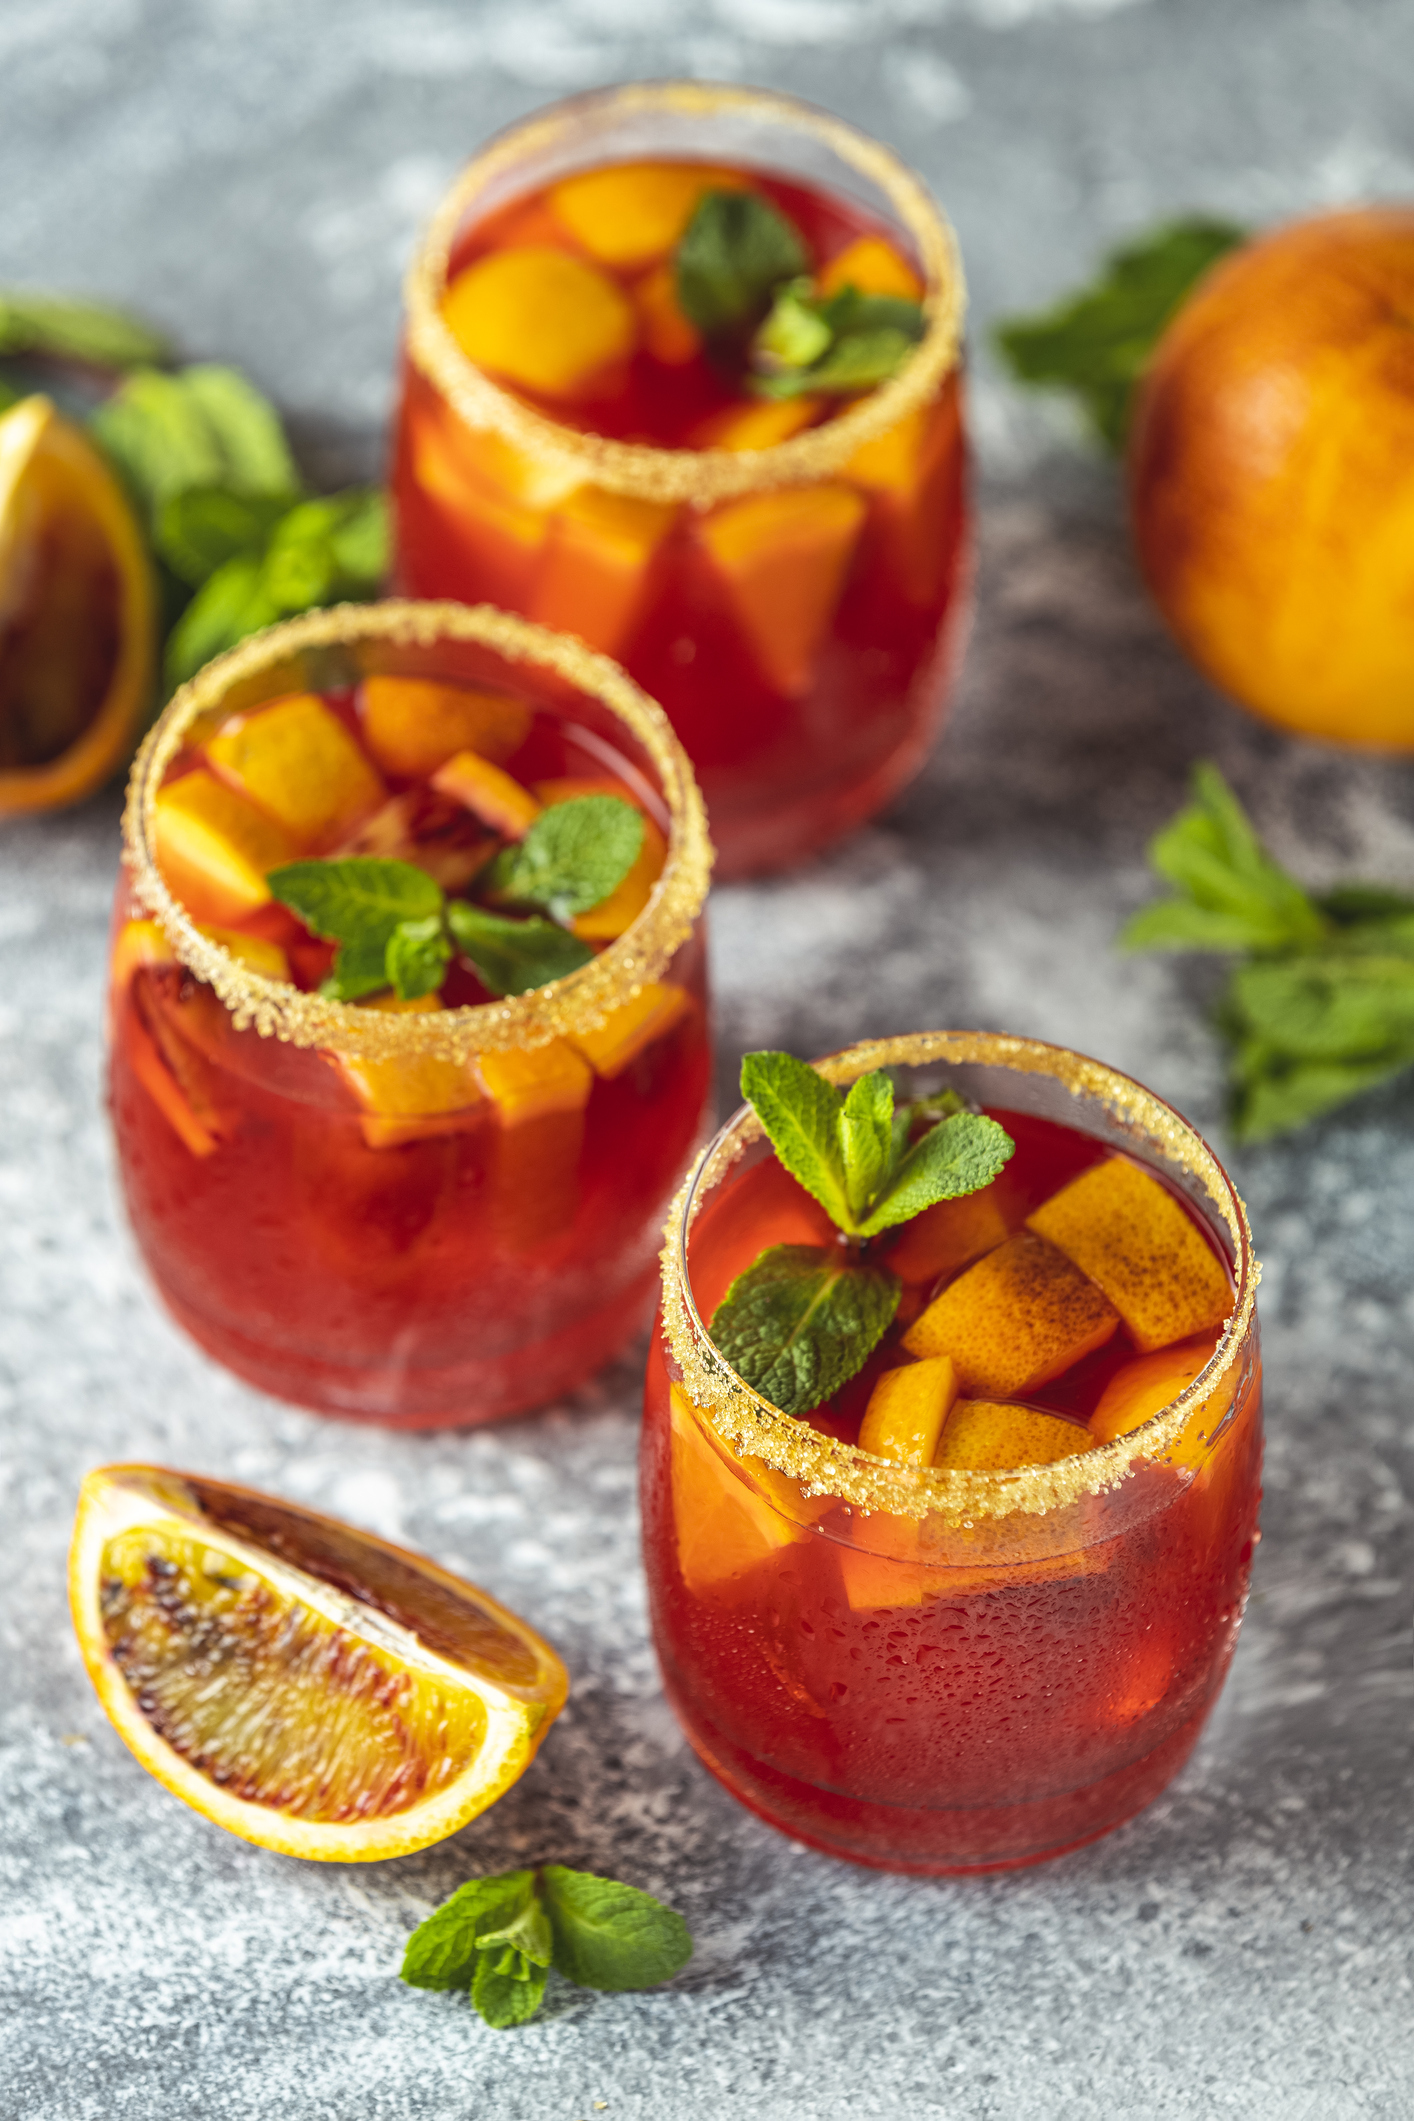 Getty Images - Pimms